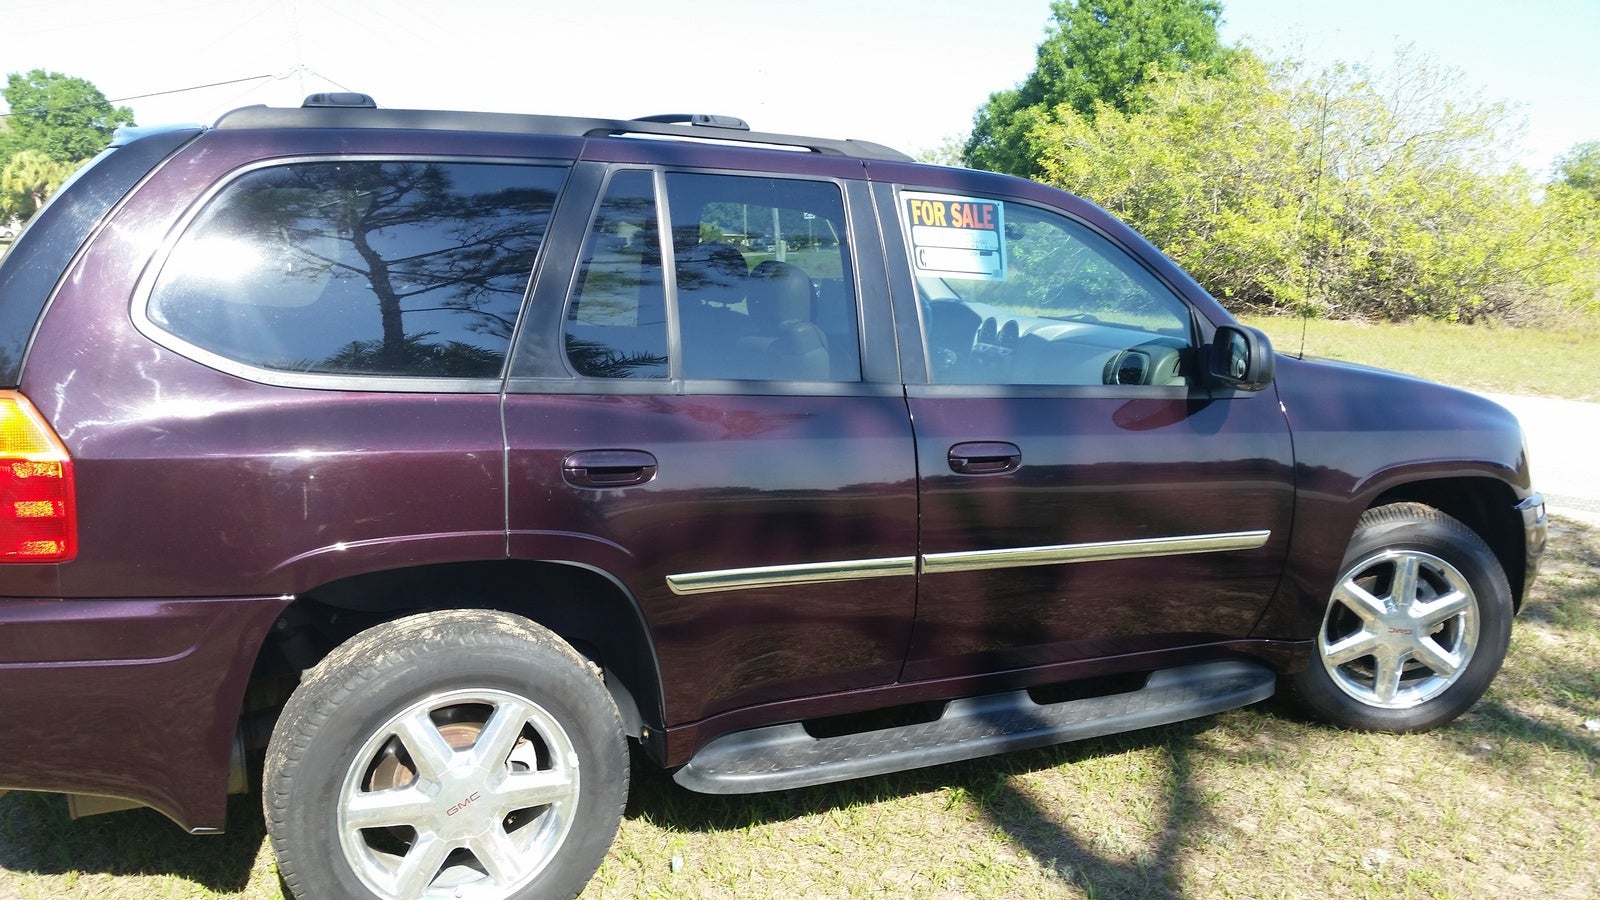 Tow rating for gmc envoy #2